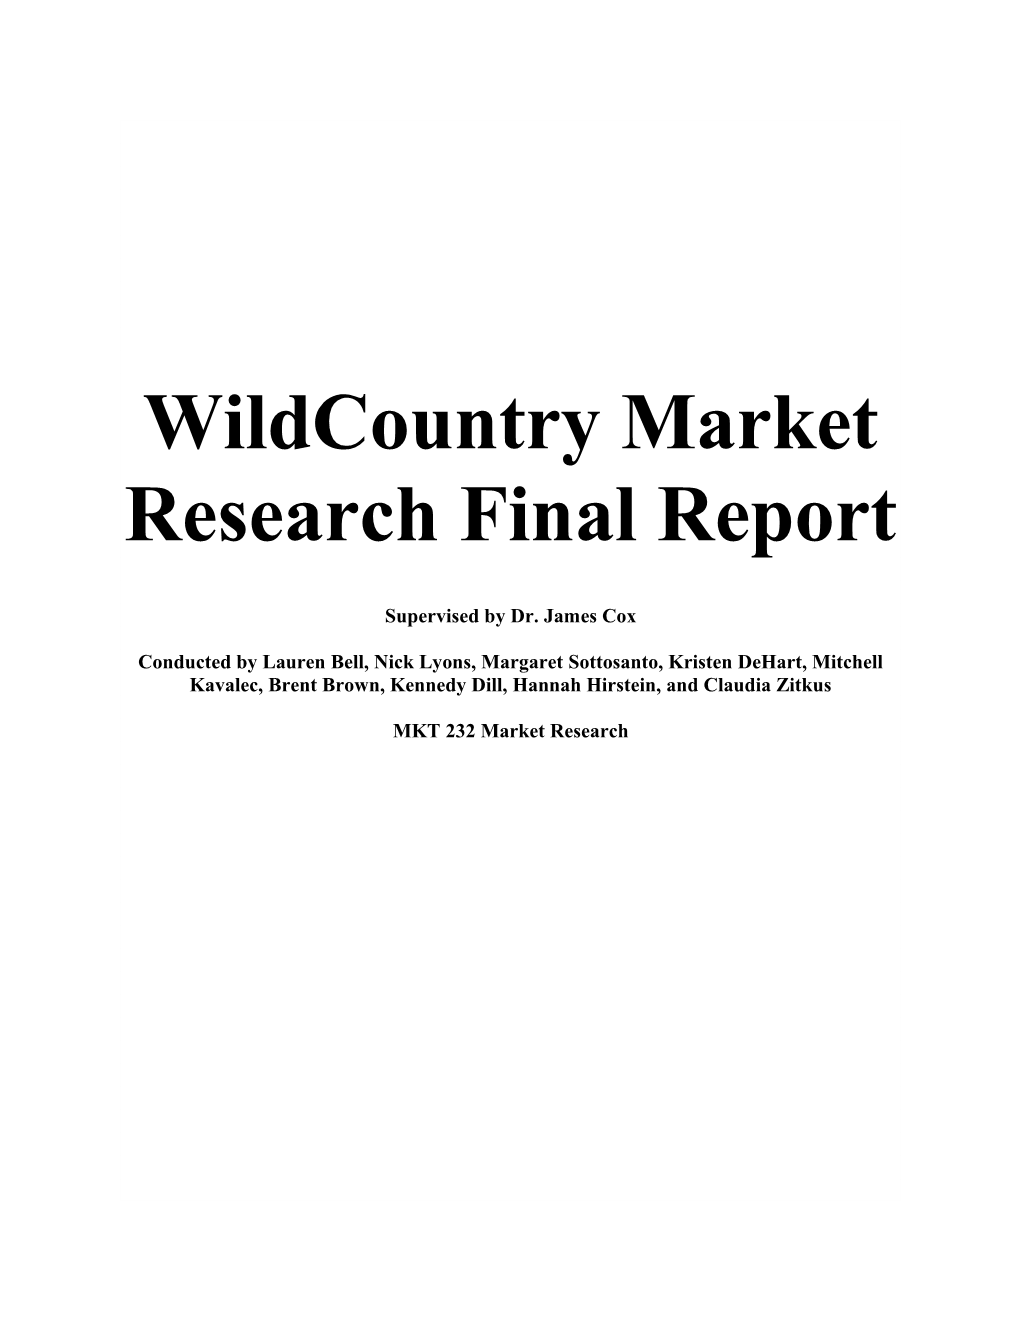 Wildcountry Market Research Final Report